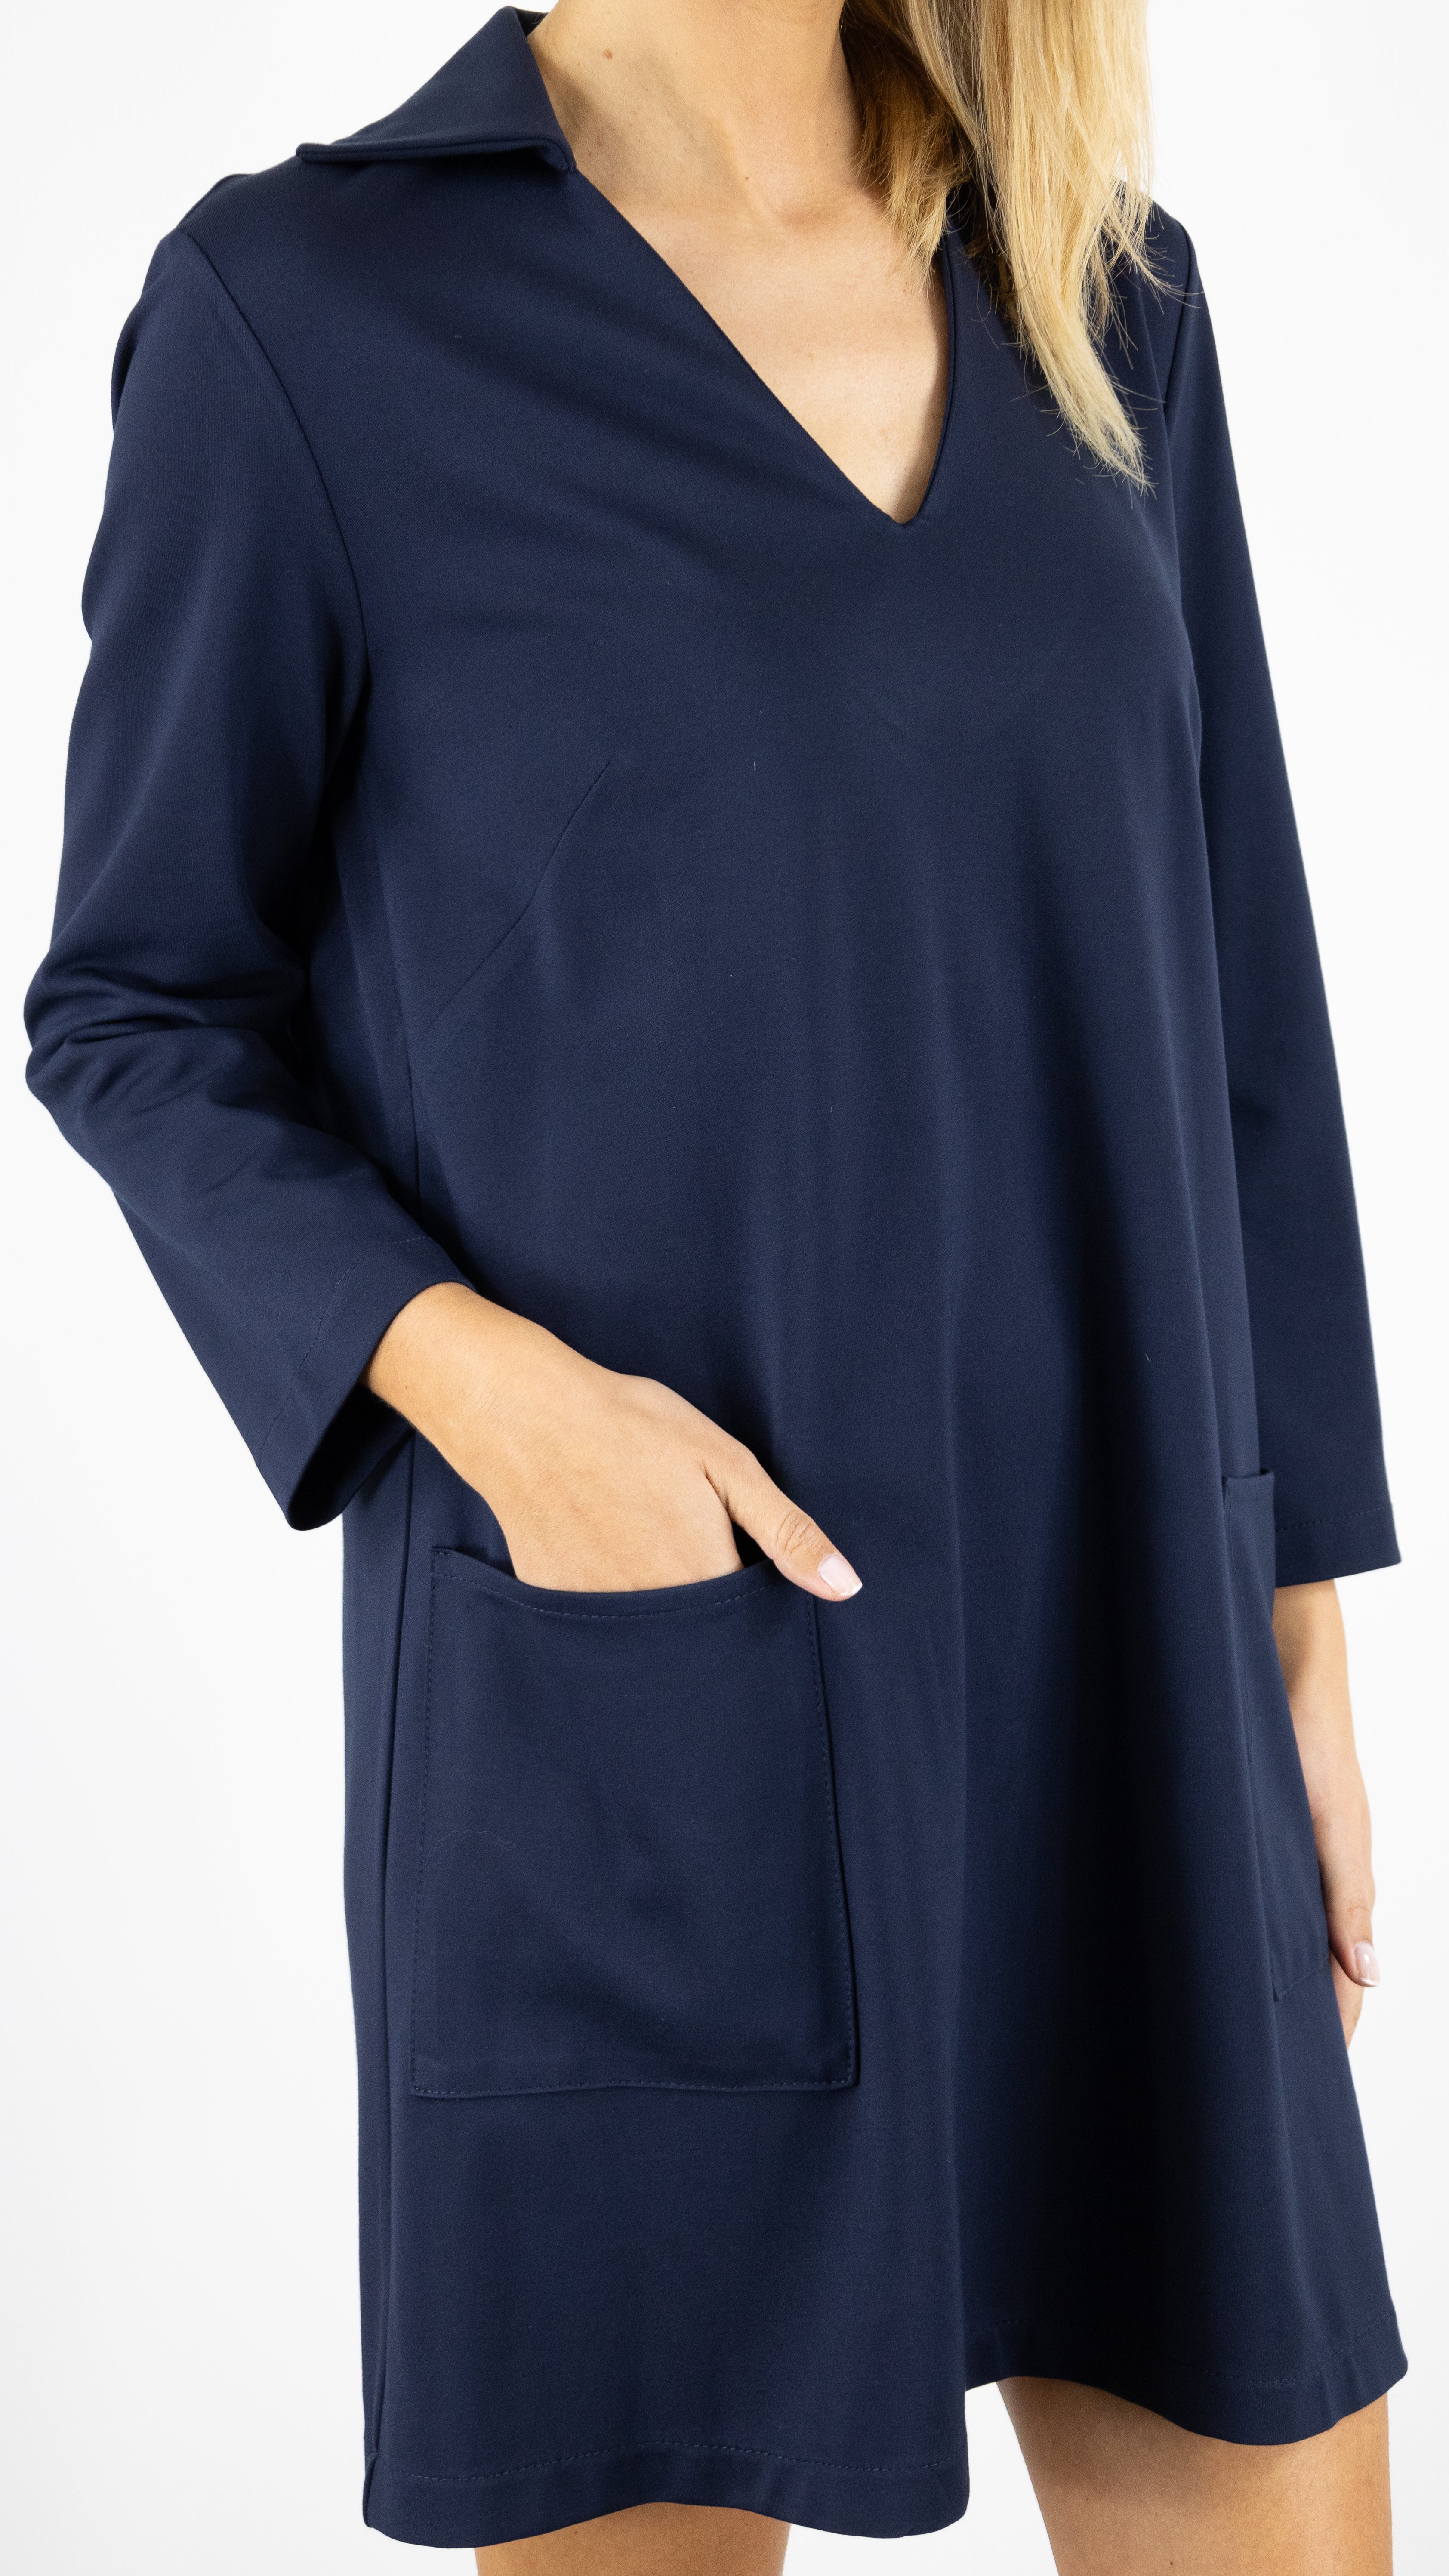 ROBE COURTE EN JERSEY COL CHEMISE AECRHAE IMPERIAL BLEU MARINE#color_1680/BLU SCURO